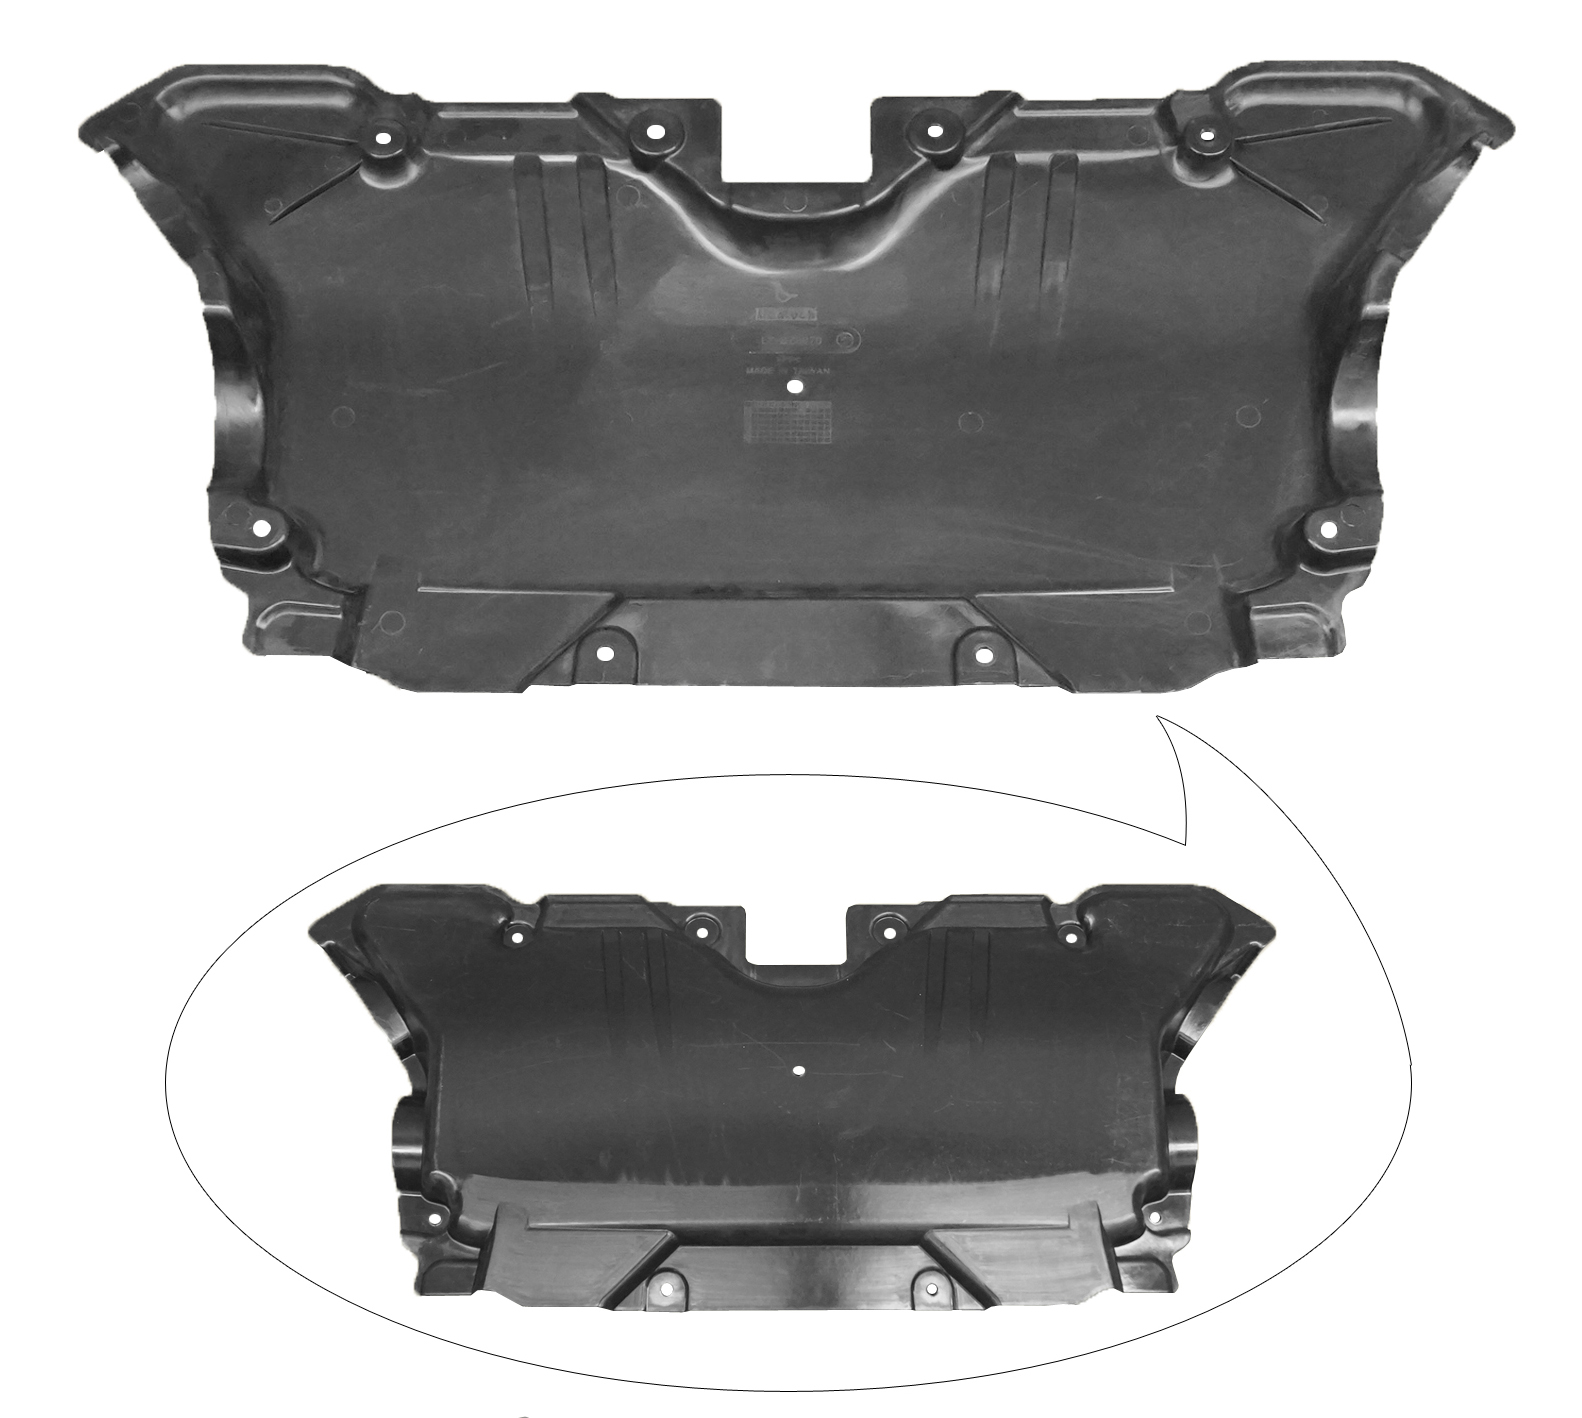 Aftermarket UNDER ENGINE COVERS for MERCEDES-BENZ - E300, E300,17-18,Lower engine cover